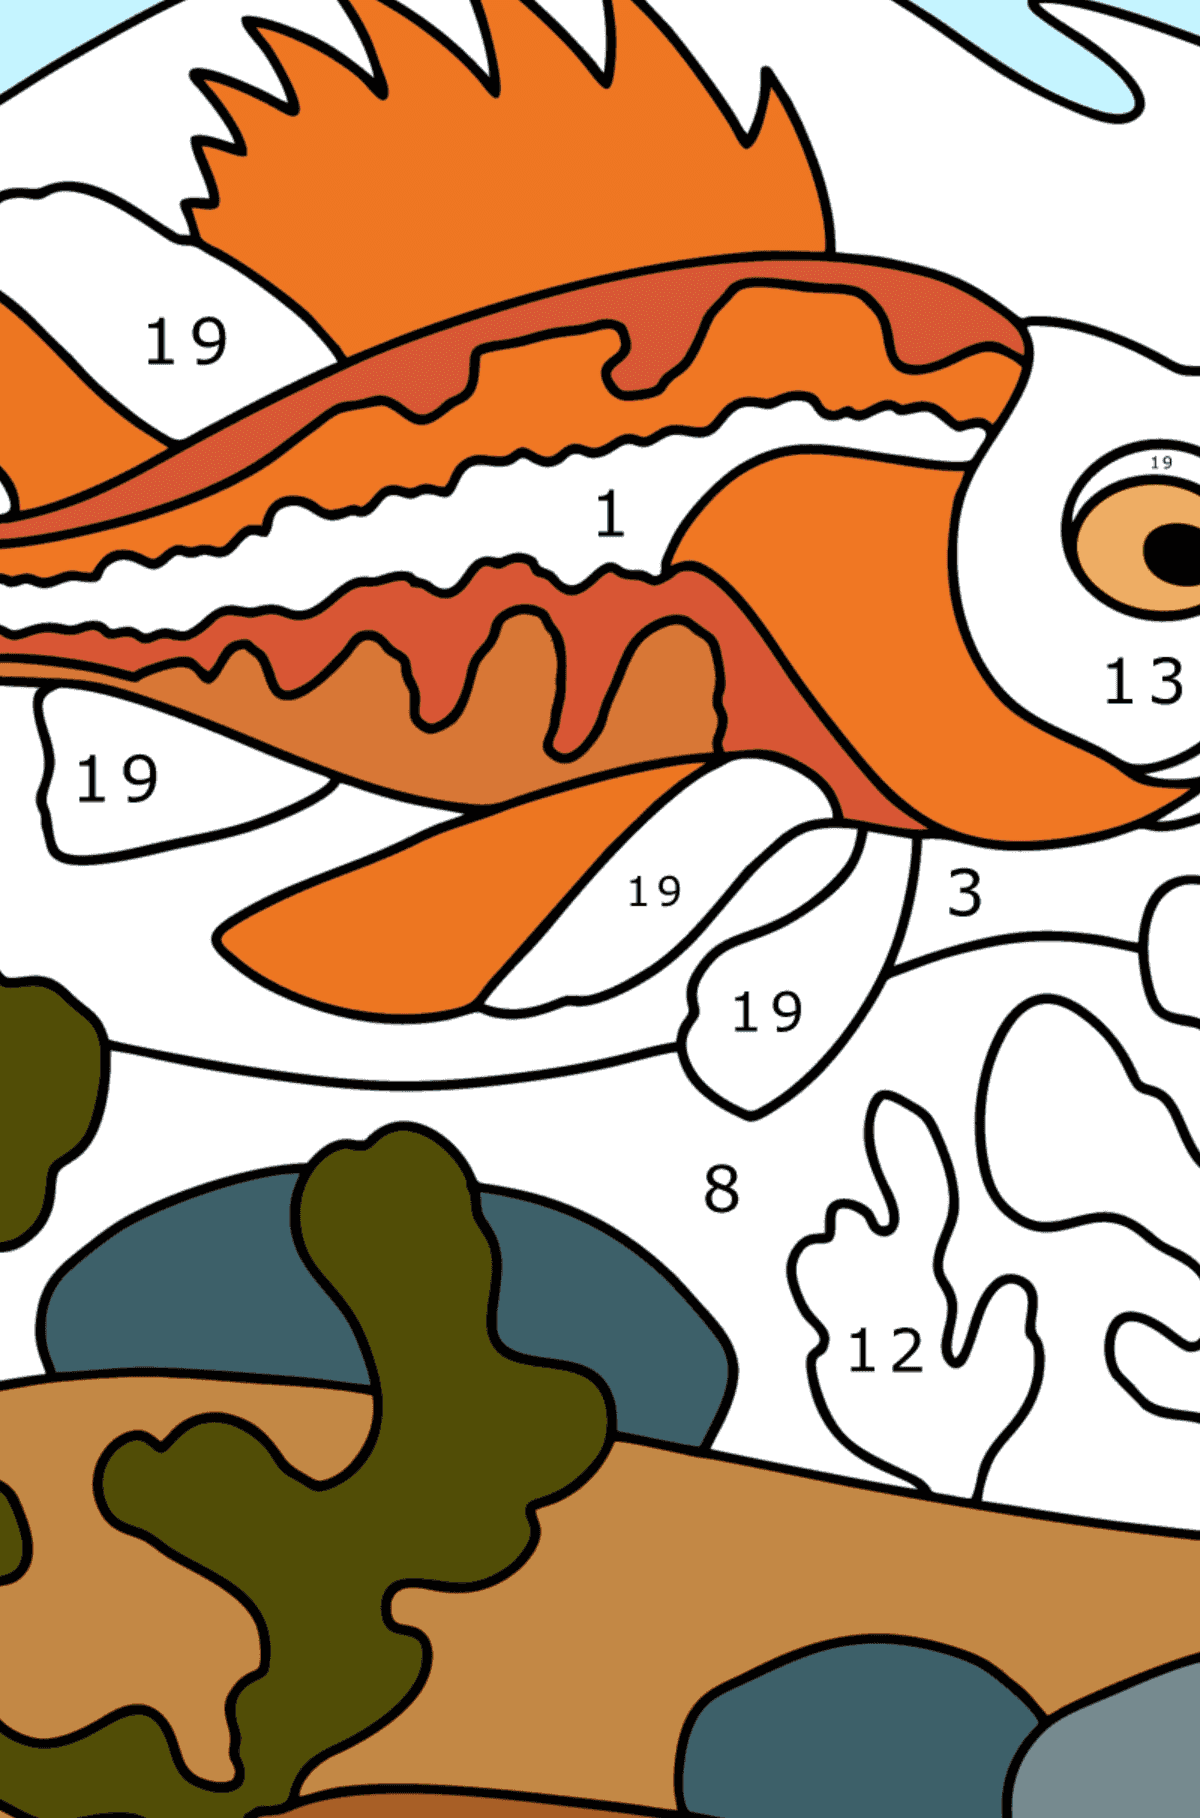 Sea bass coloring page - Coloring by Numbers for Kids